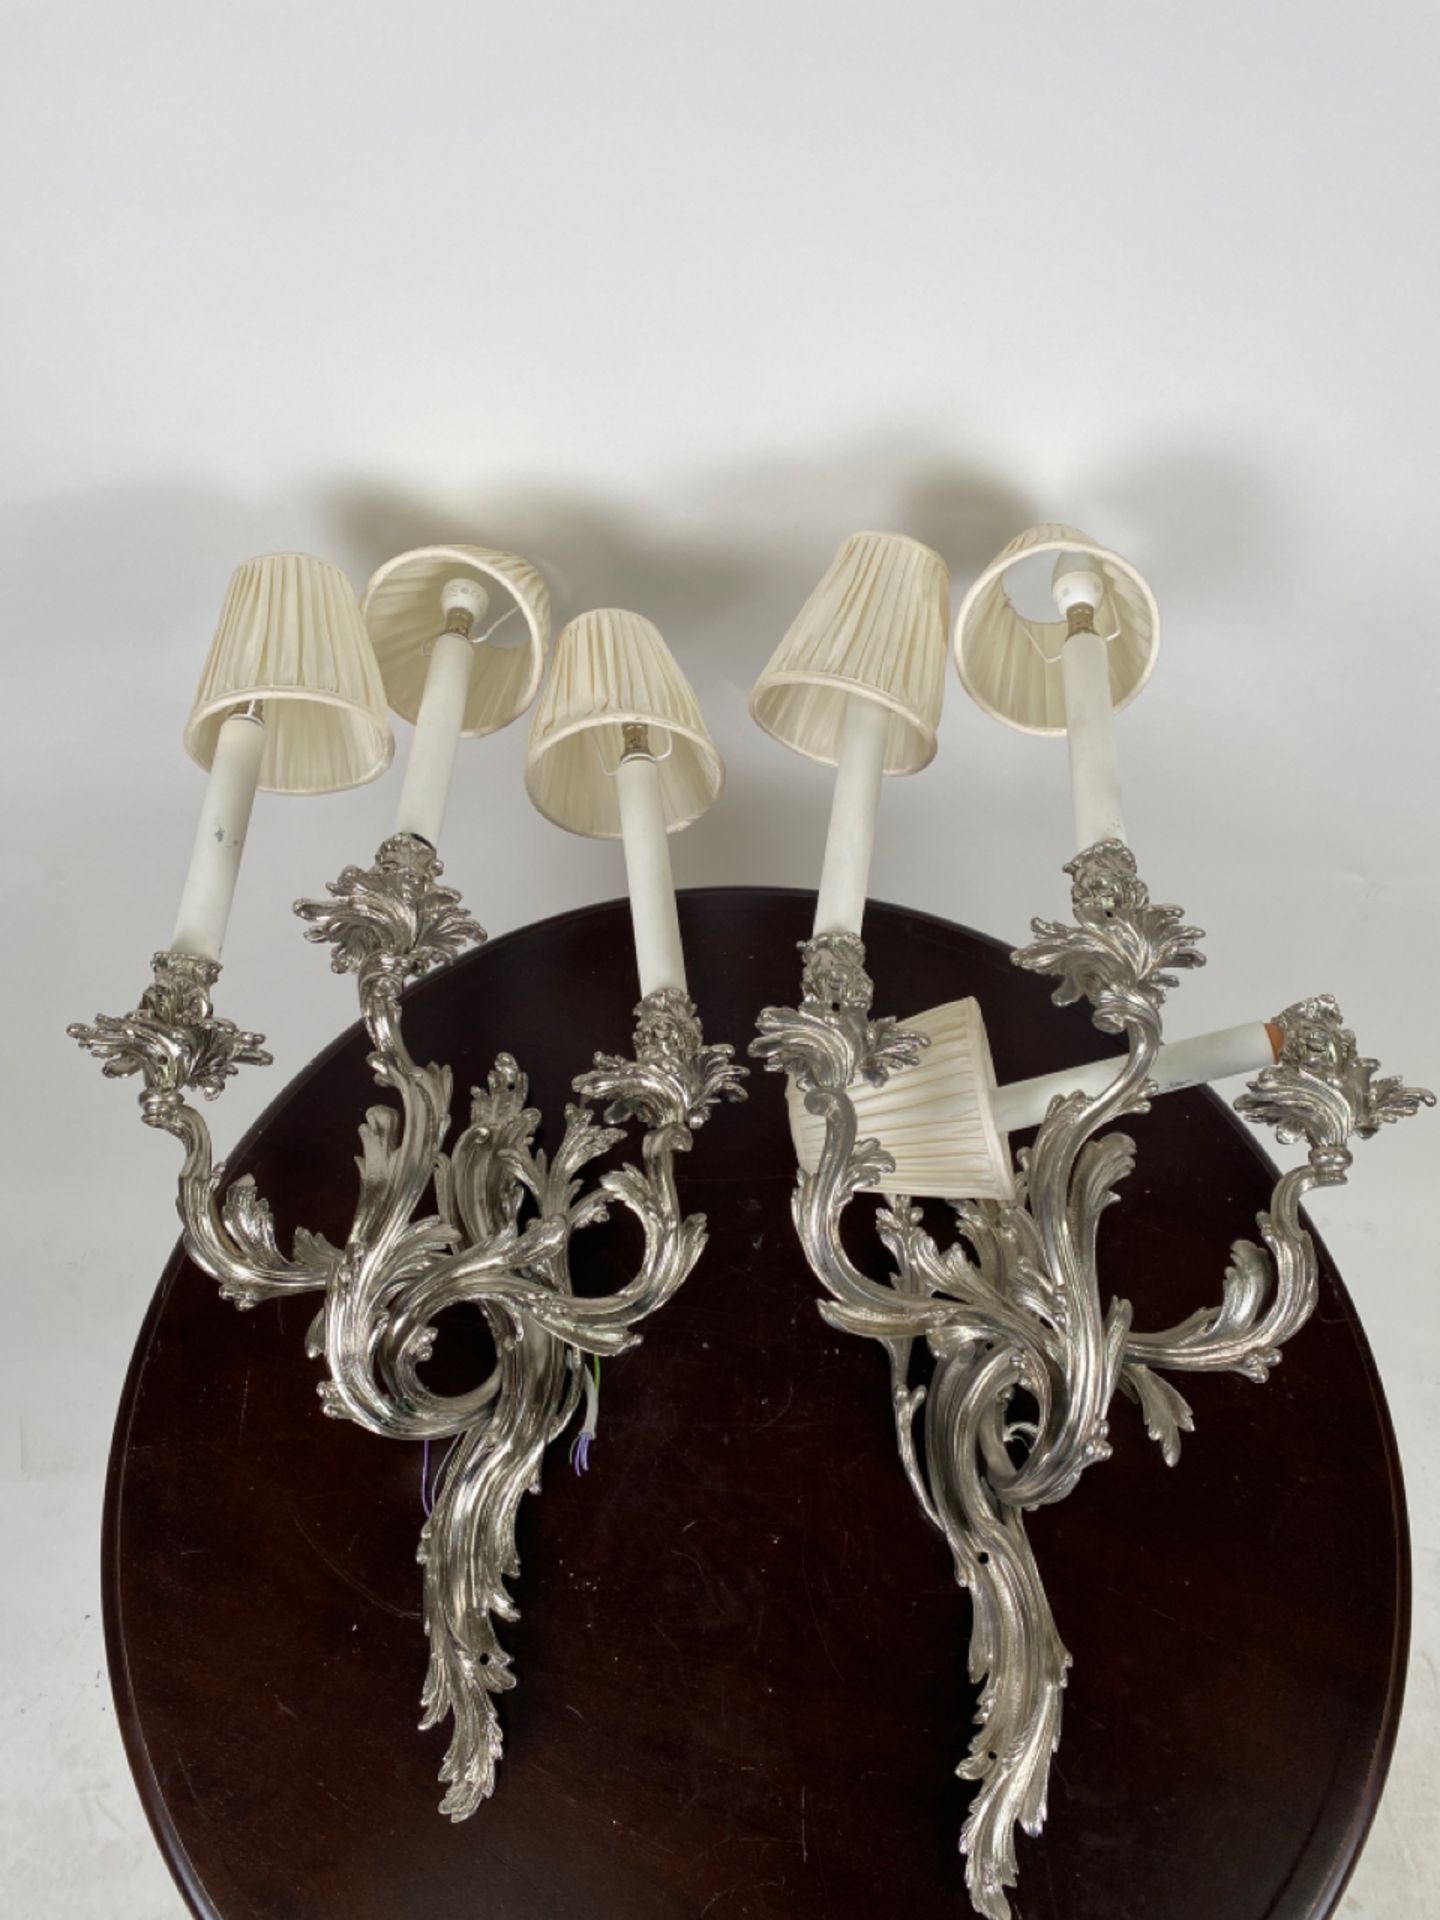 Set of 4 French Style Silver Wall Lights - Image 2 of 4